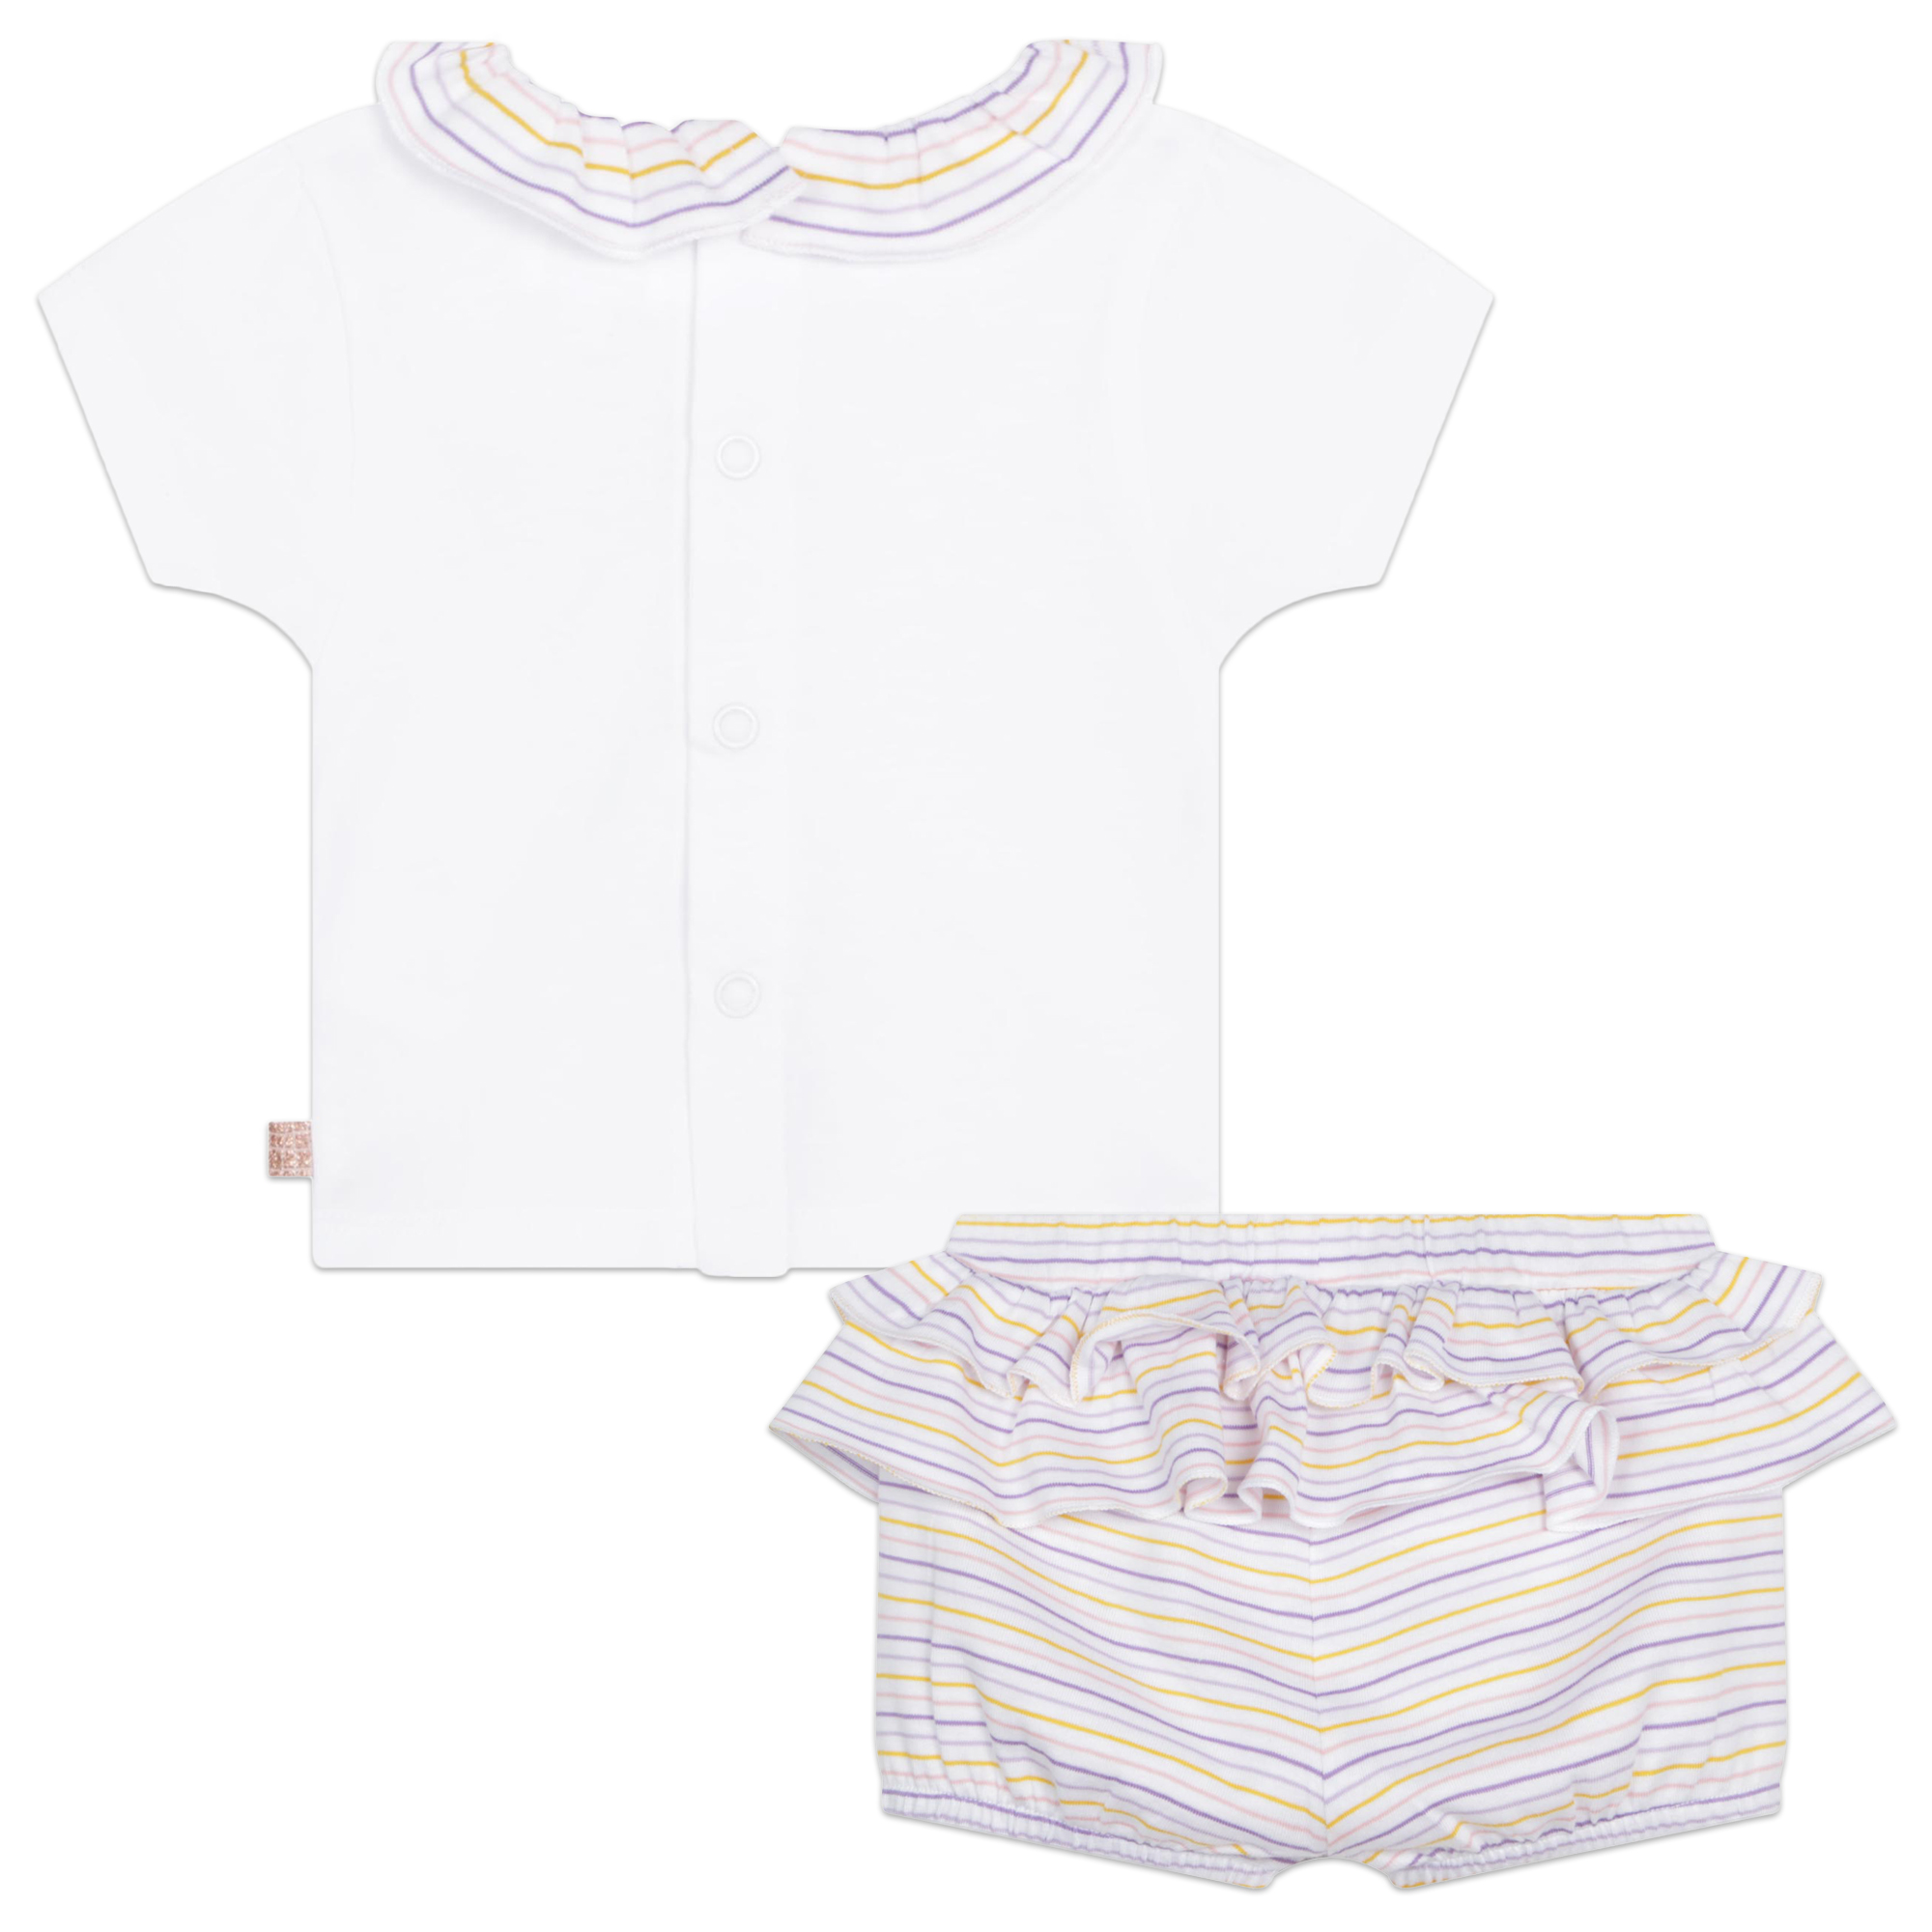 T-shirt and shorts outfit CARREMENT BEAU for GIRL